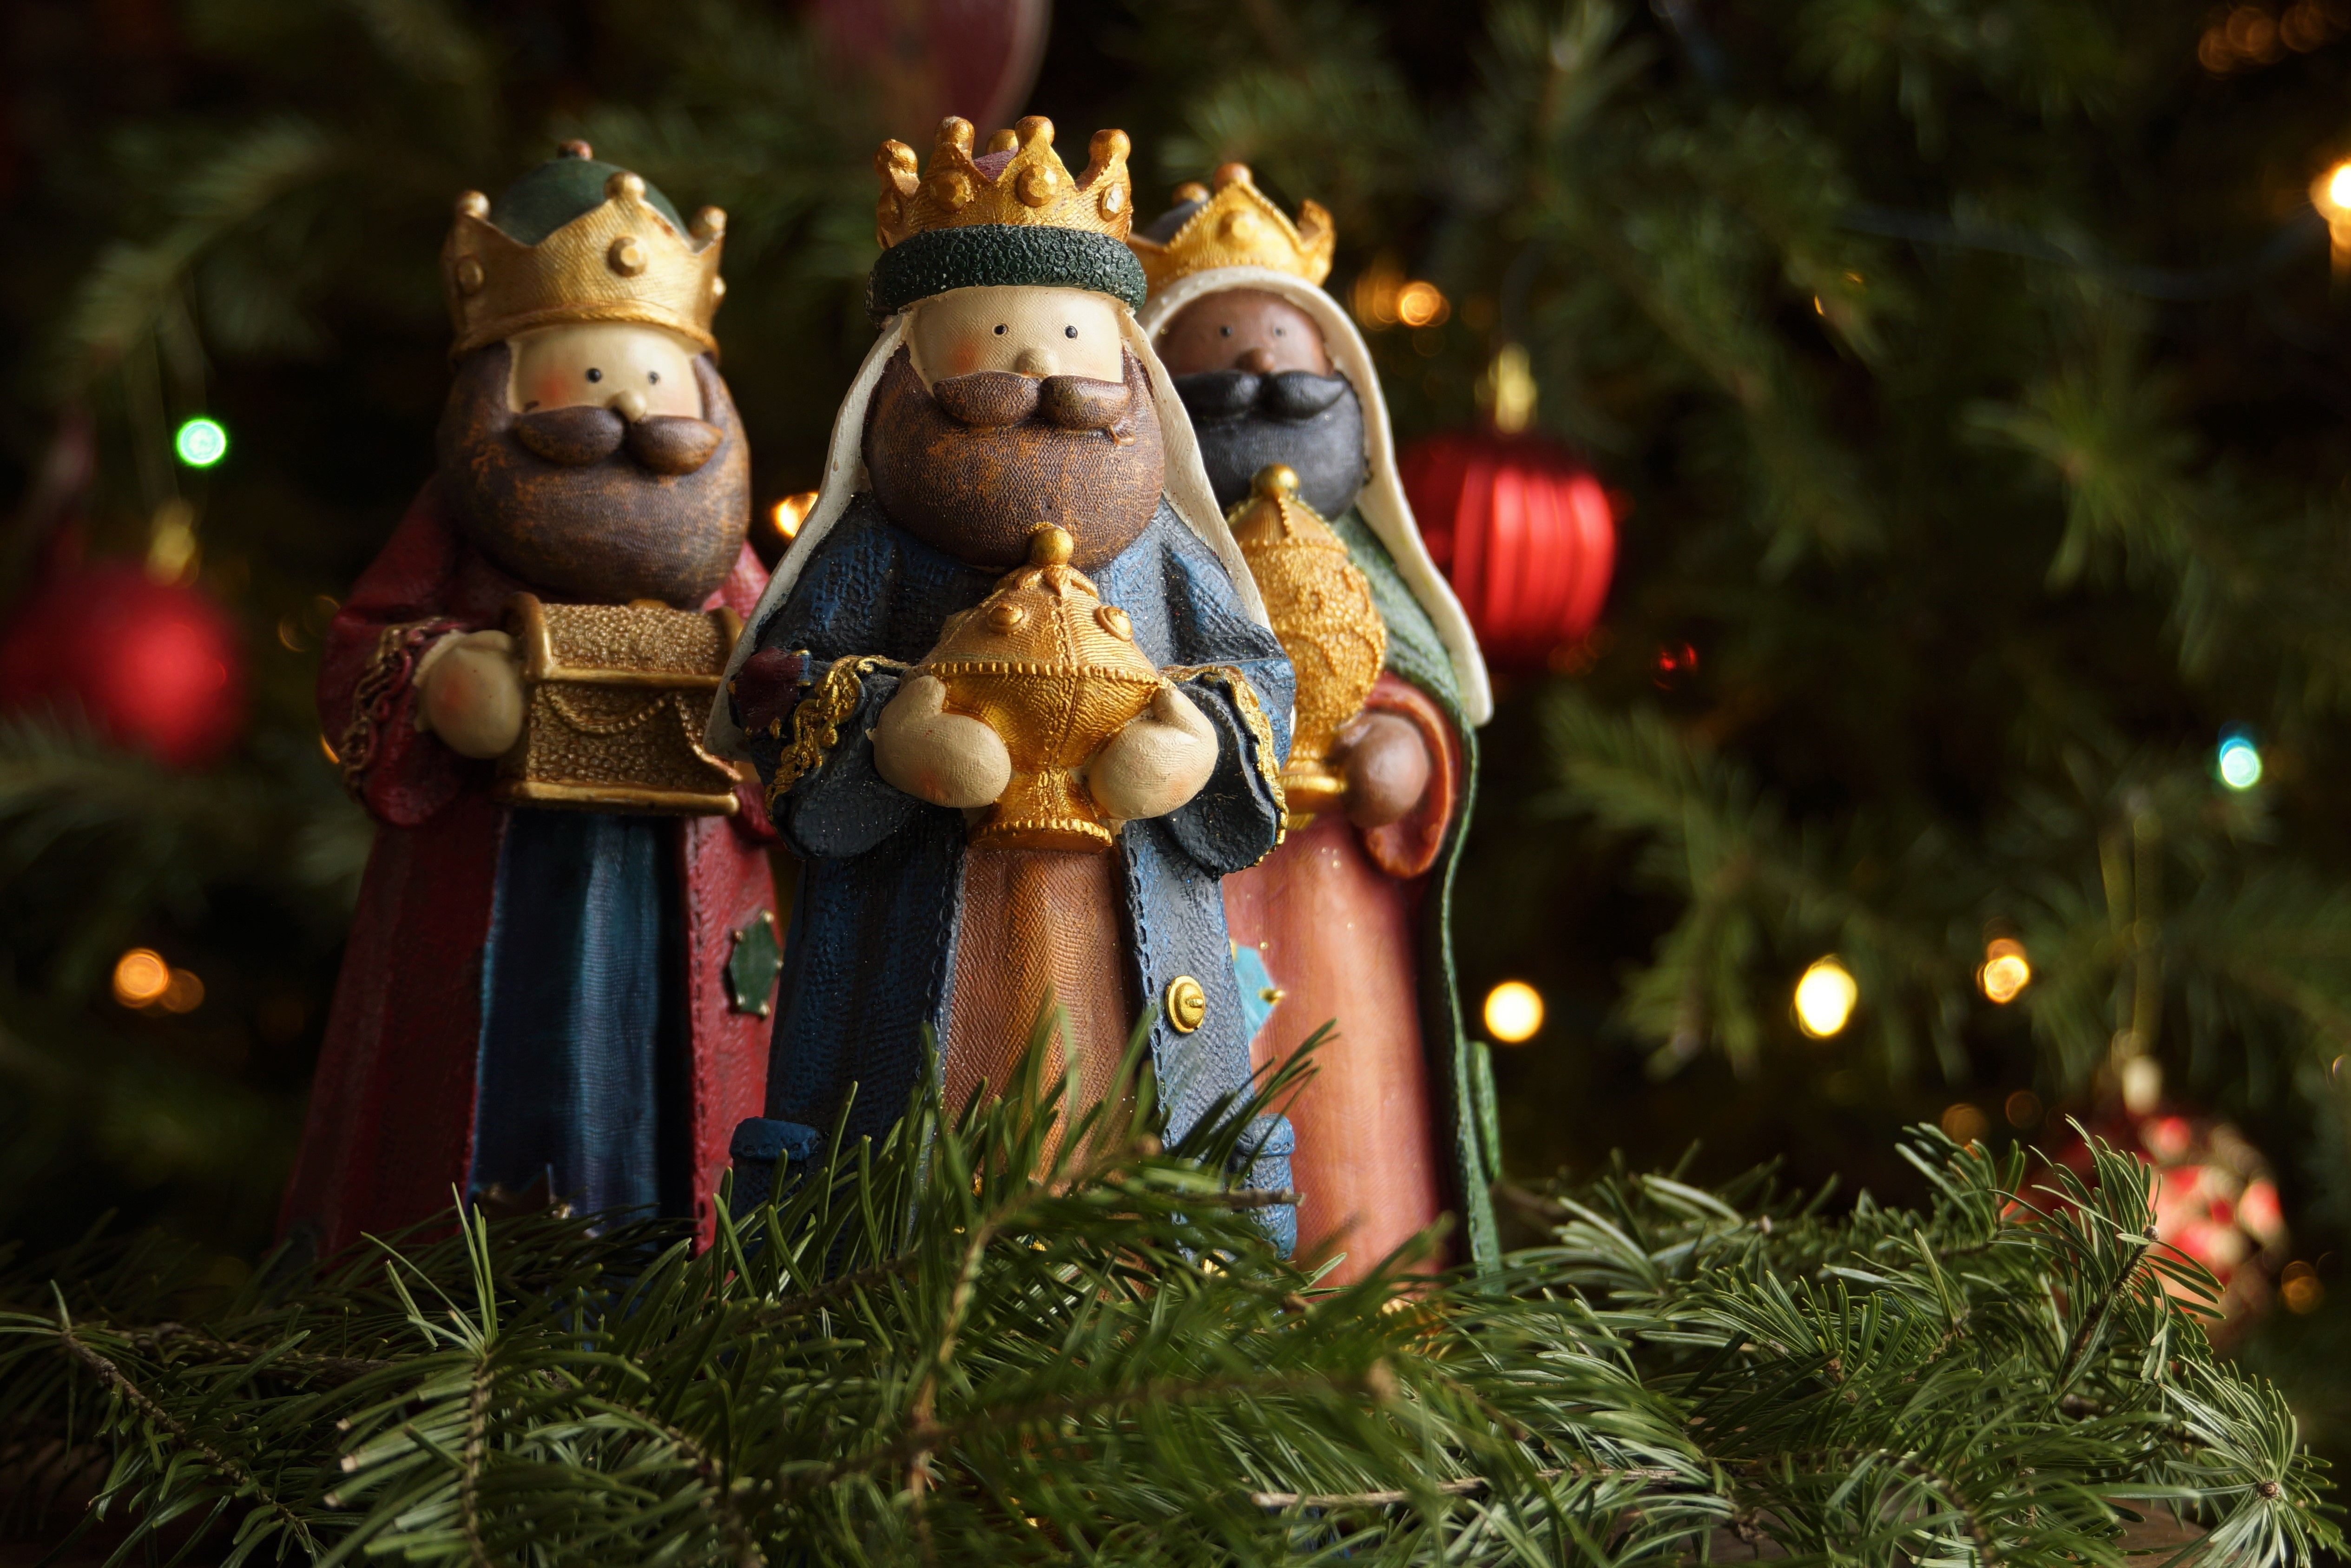 When does Christmas actually end? Here are the different views